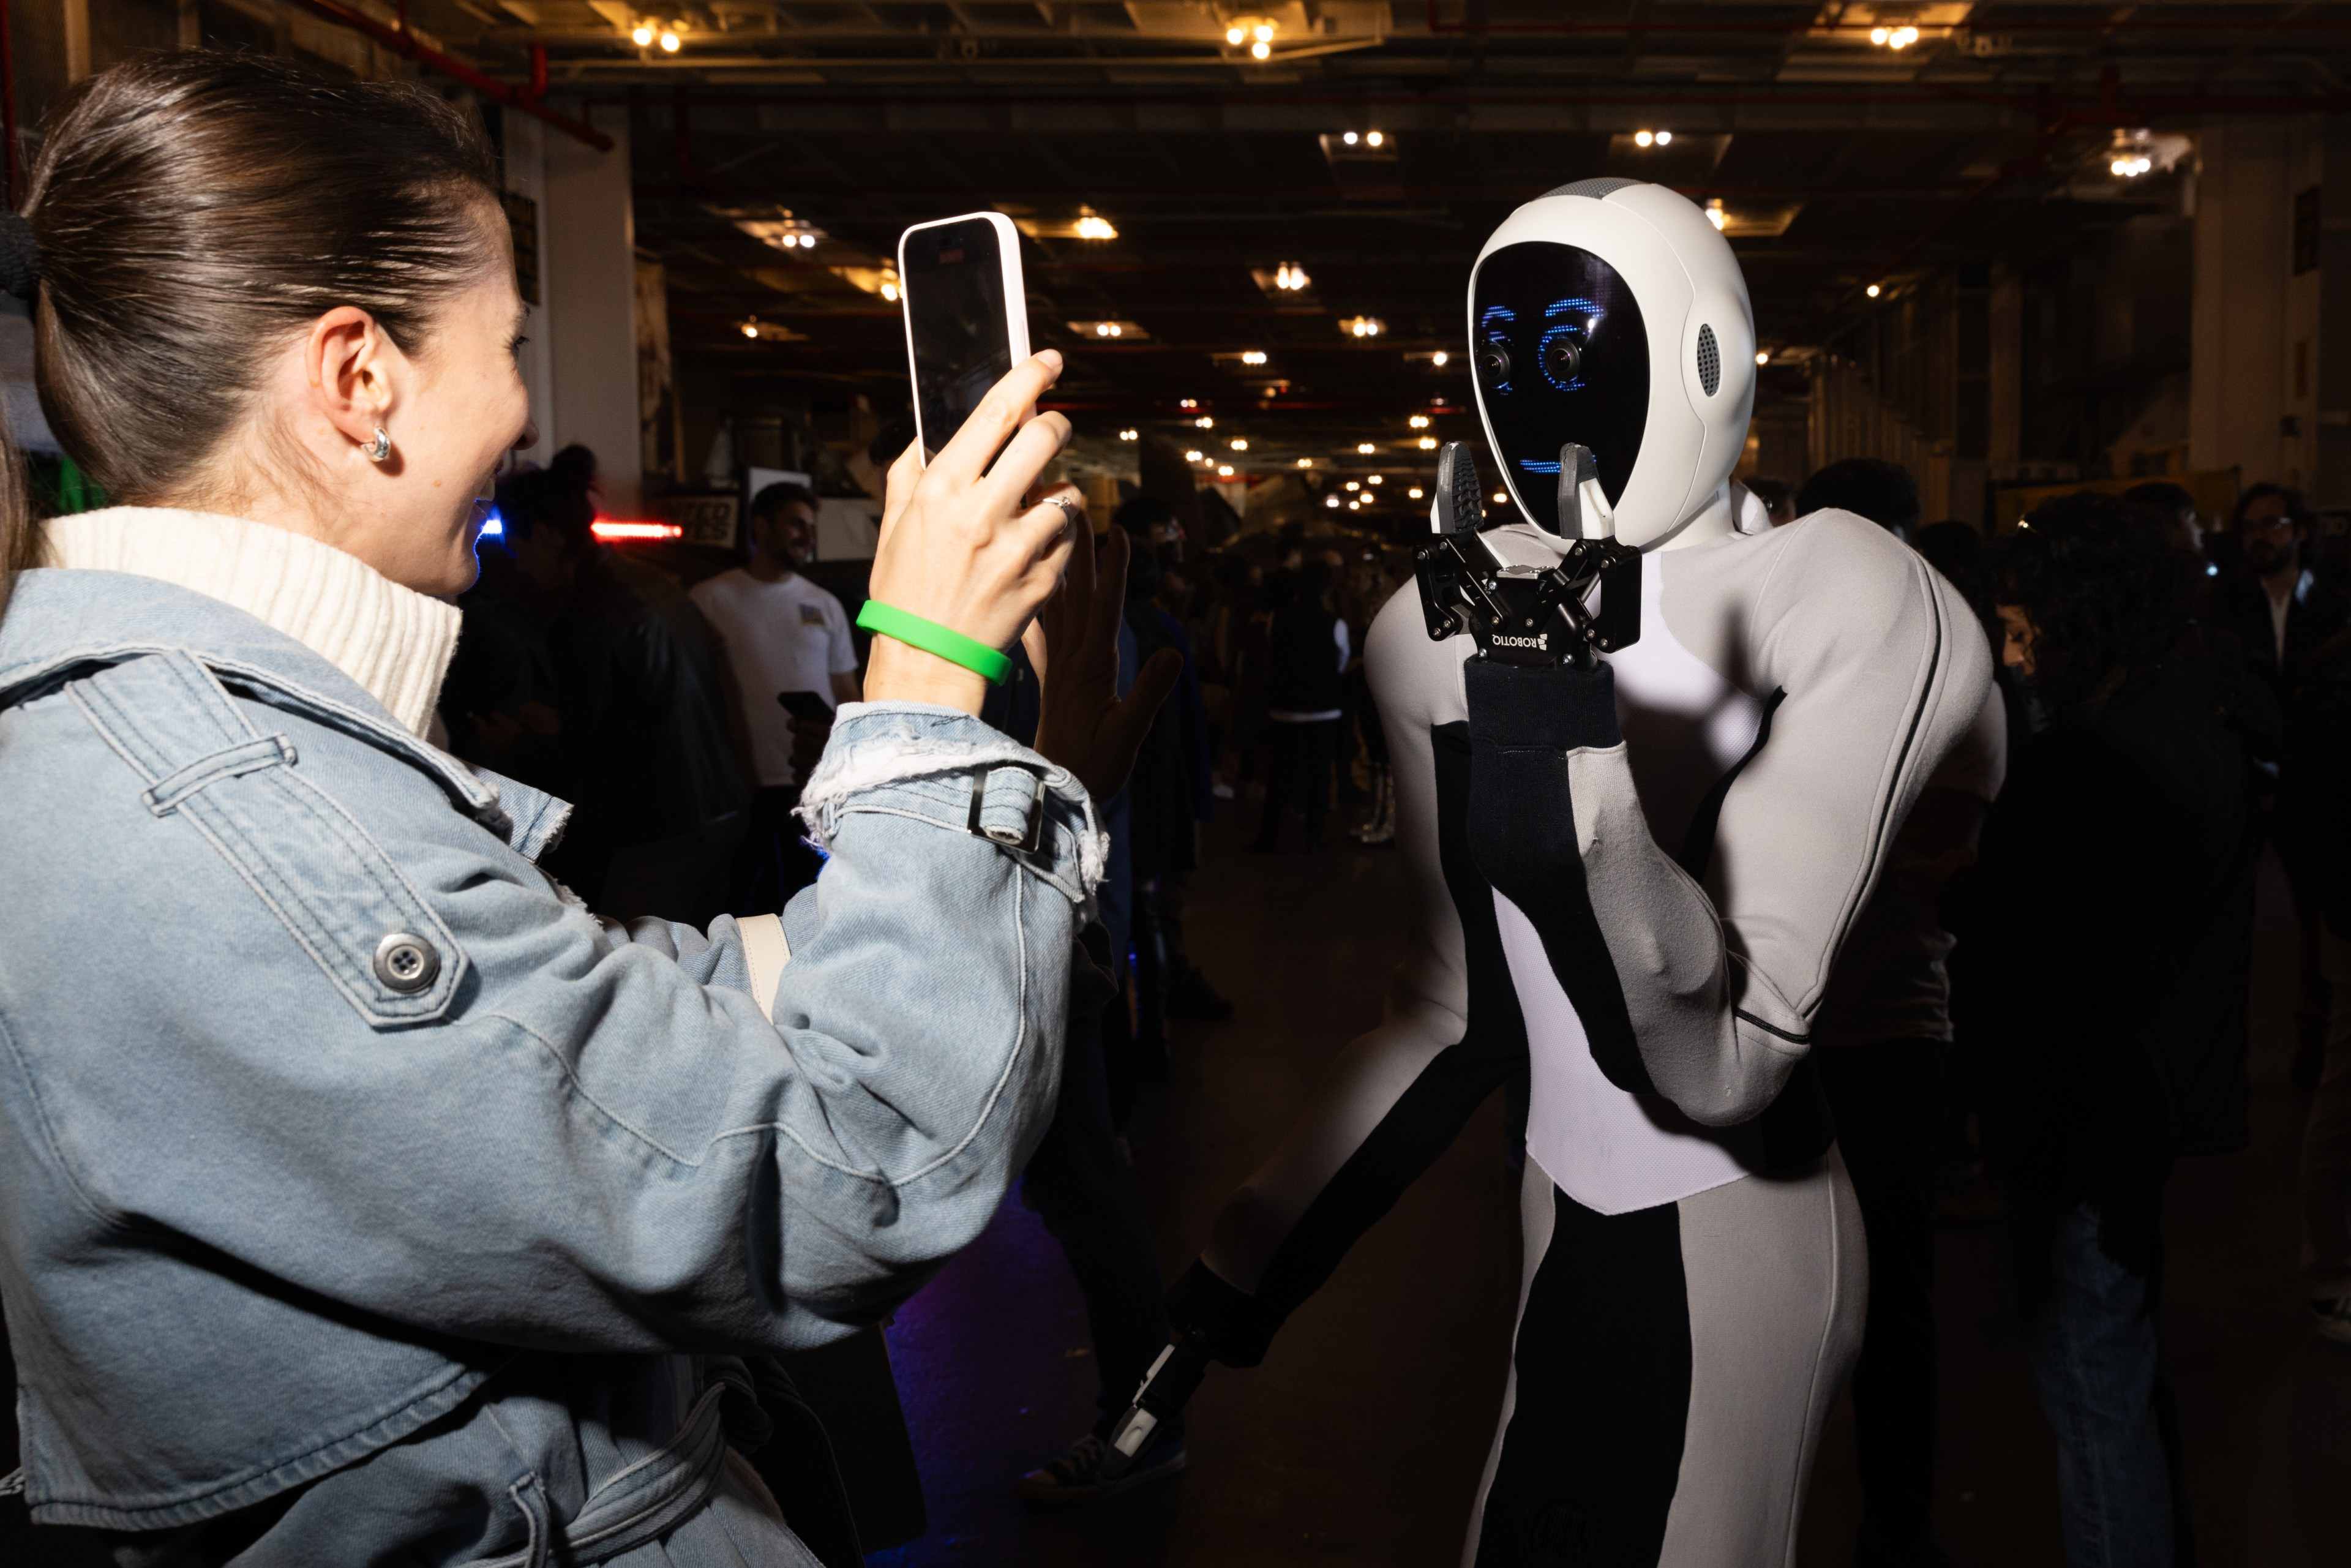 A woman takes a photo of a humanoid robot with her smartphone in a dimly lit indoor setting where several people are present in the background.